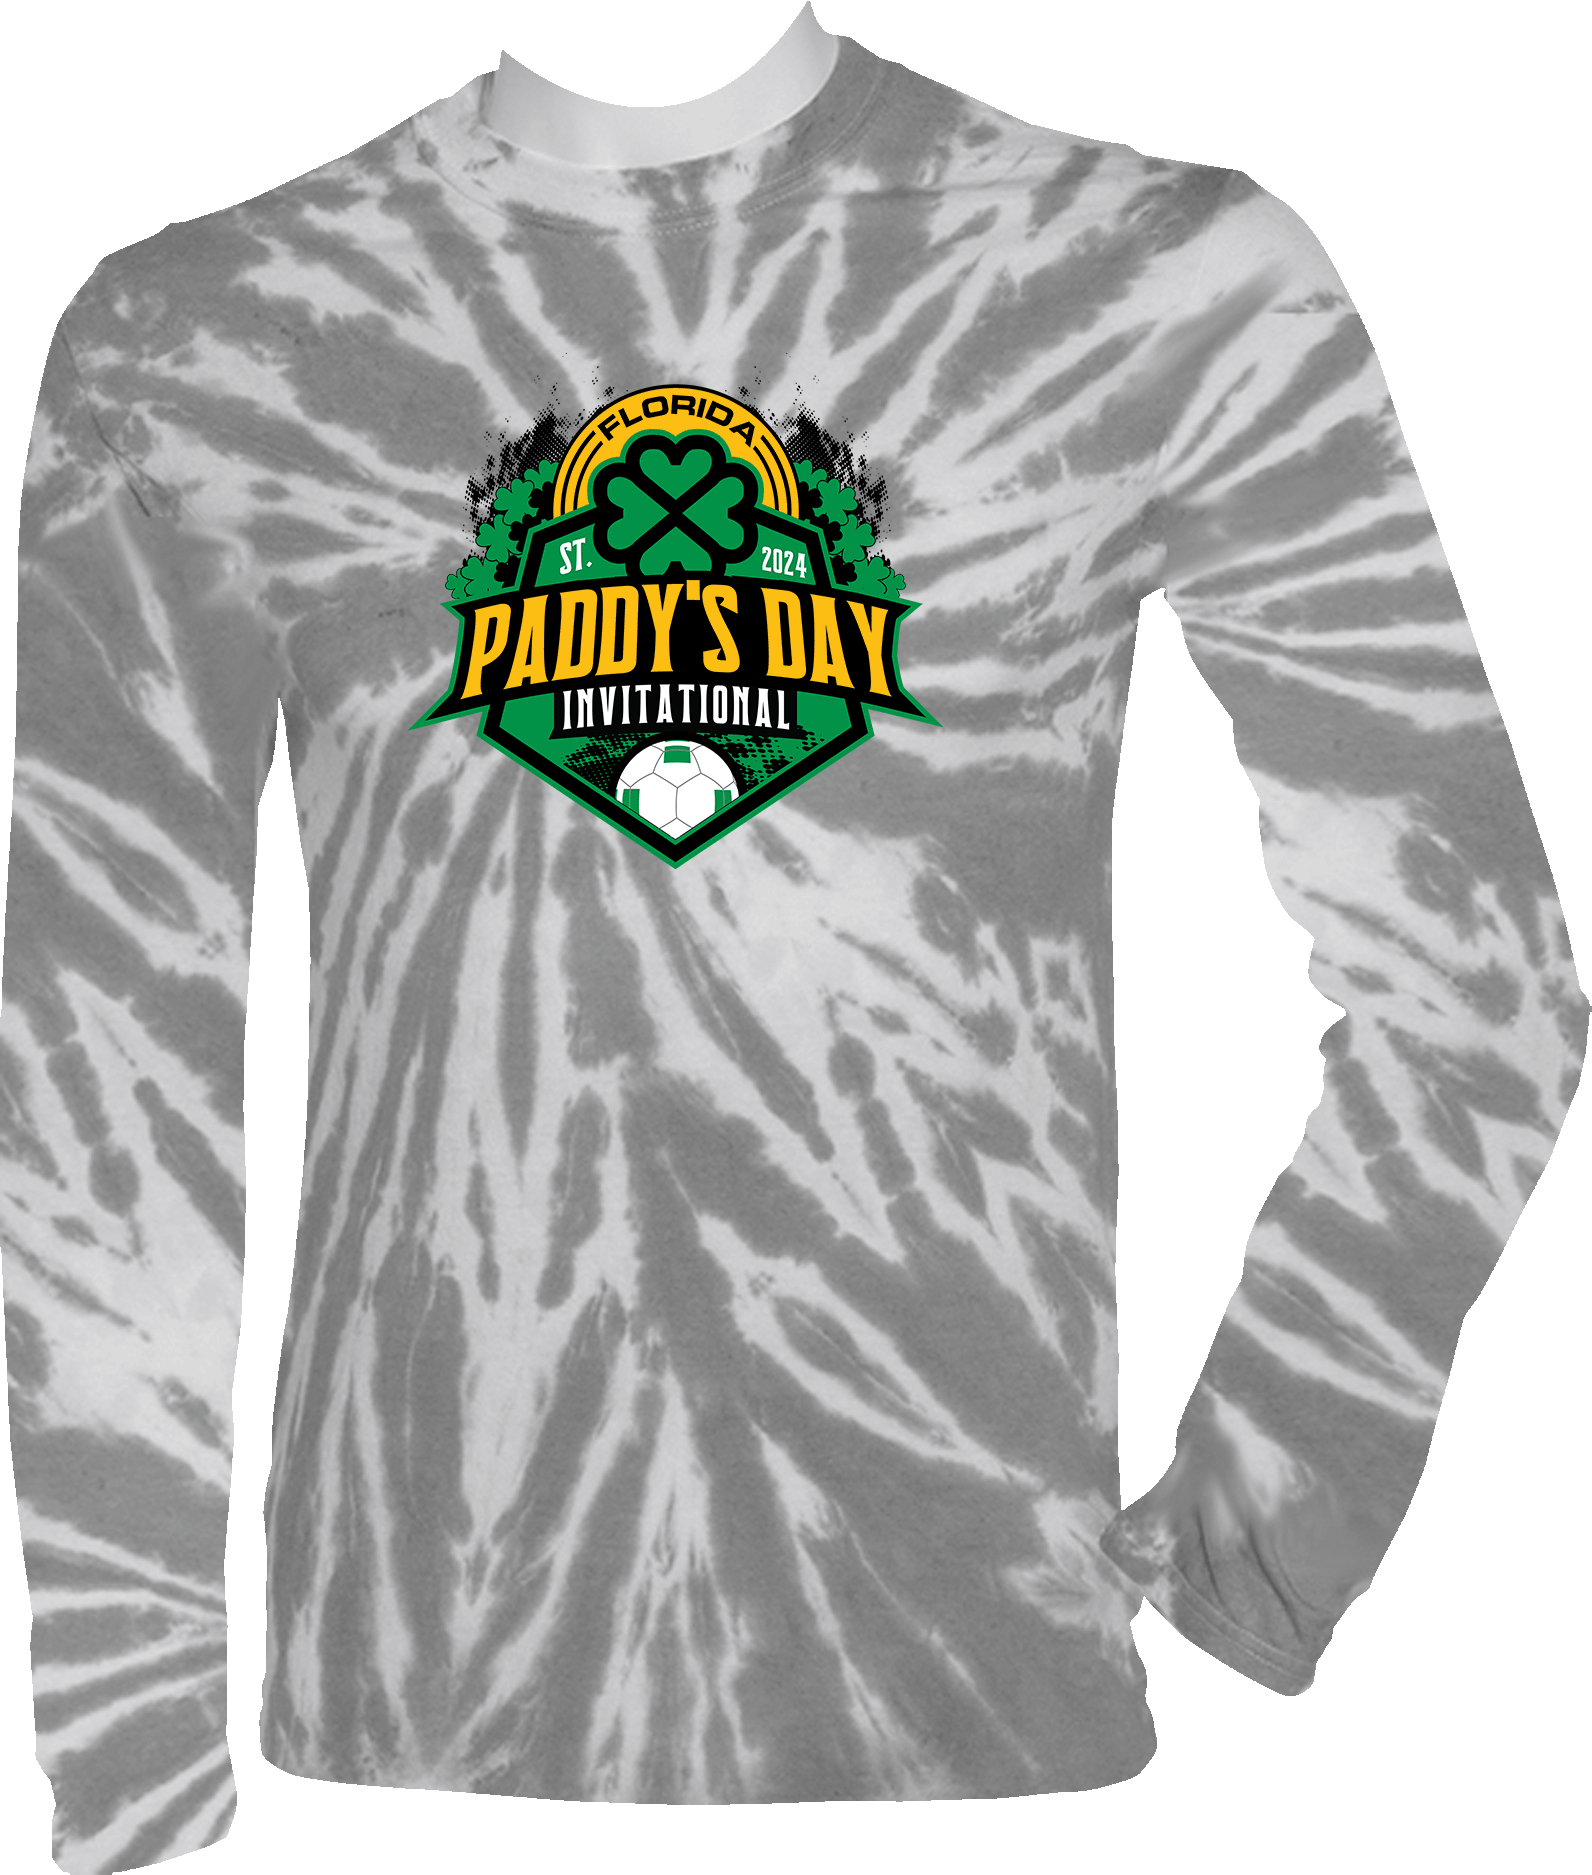 Tie-Dye Long Sleeves - 2024 Florida St. Paddy's Day Invitational